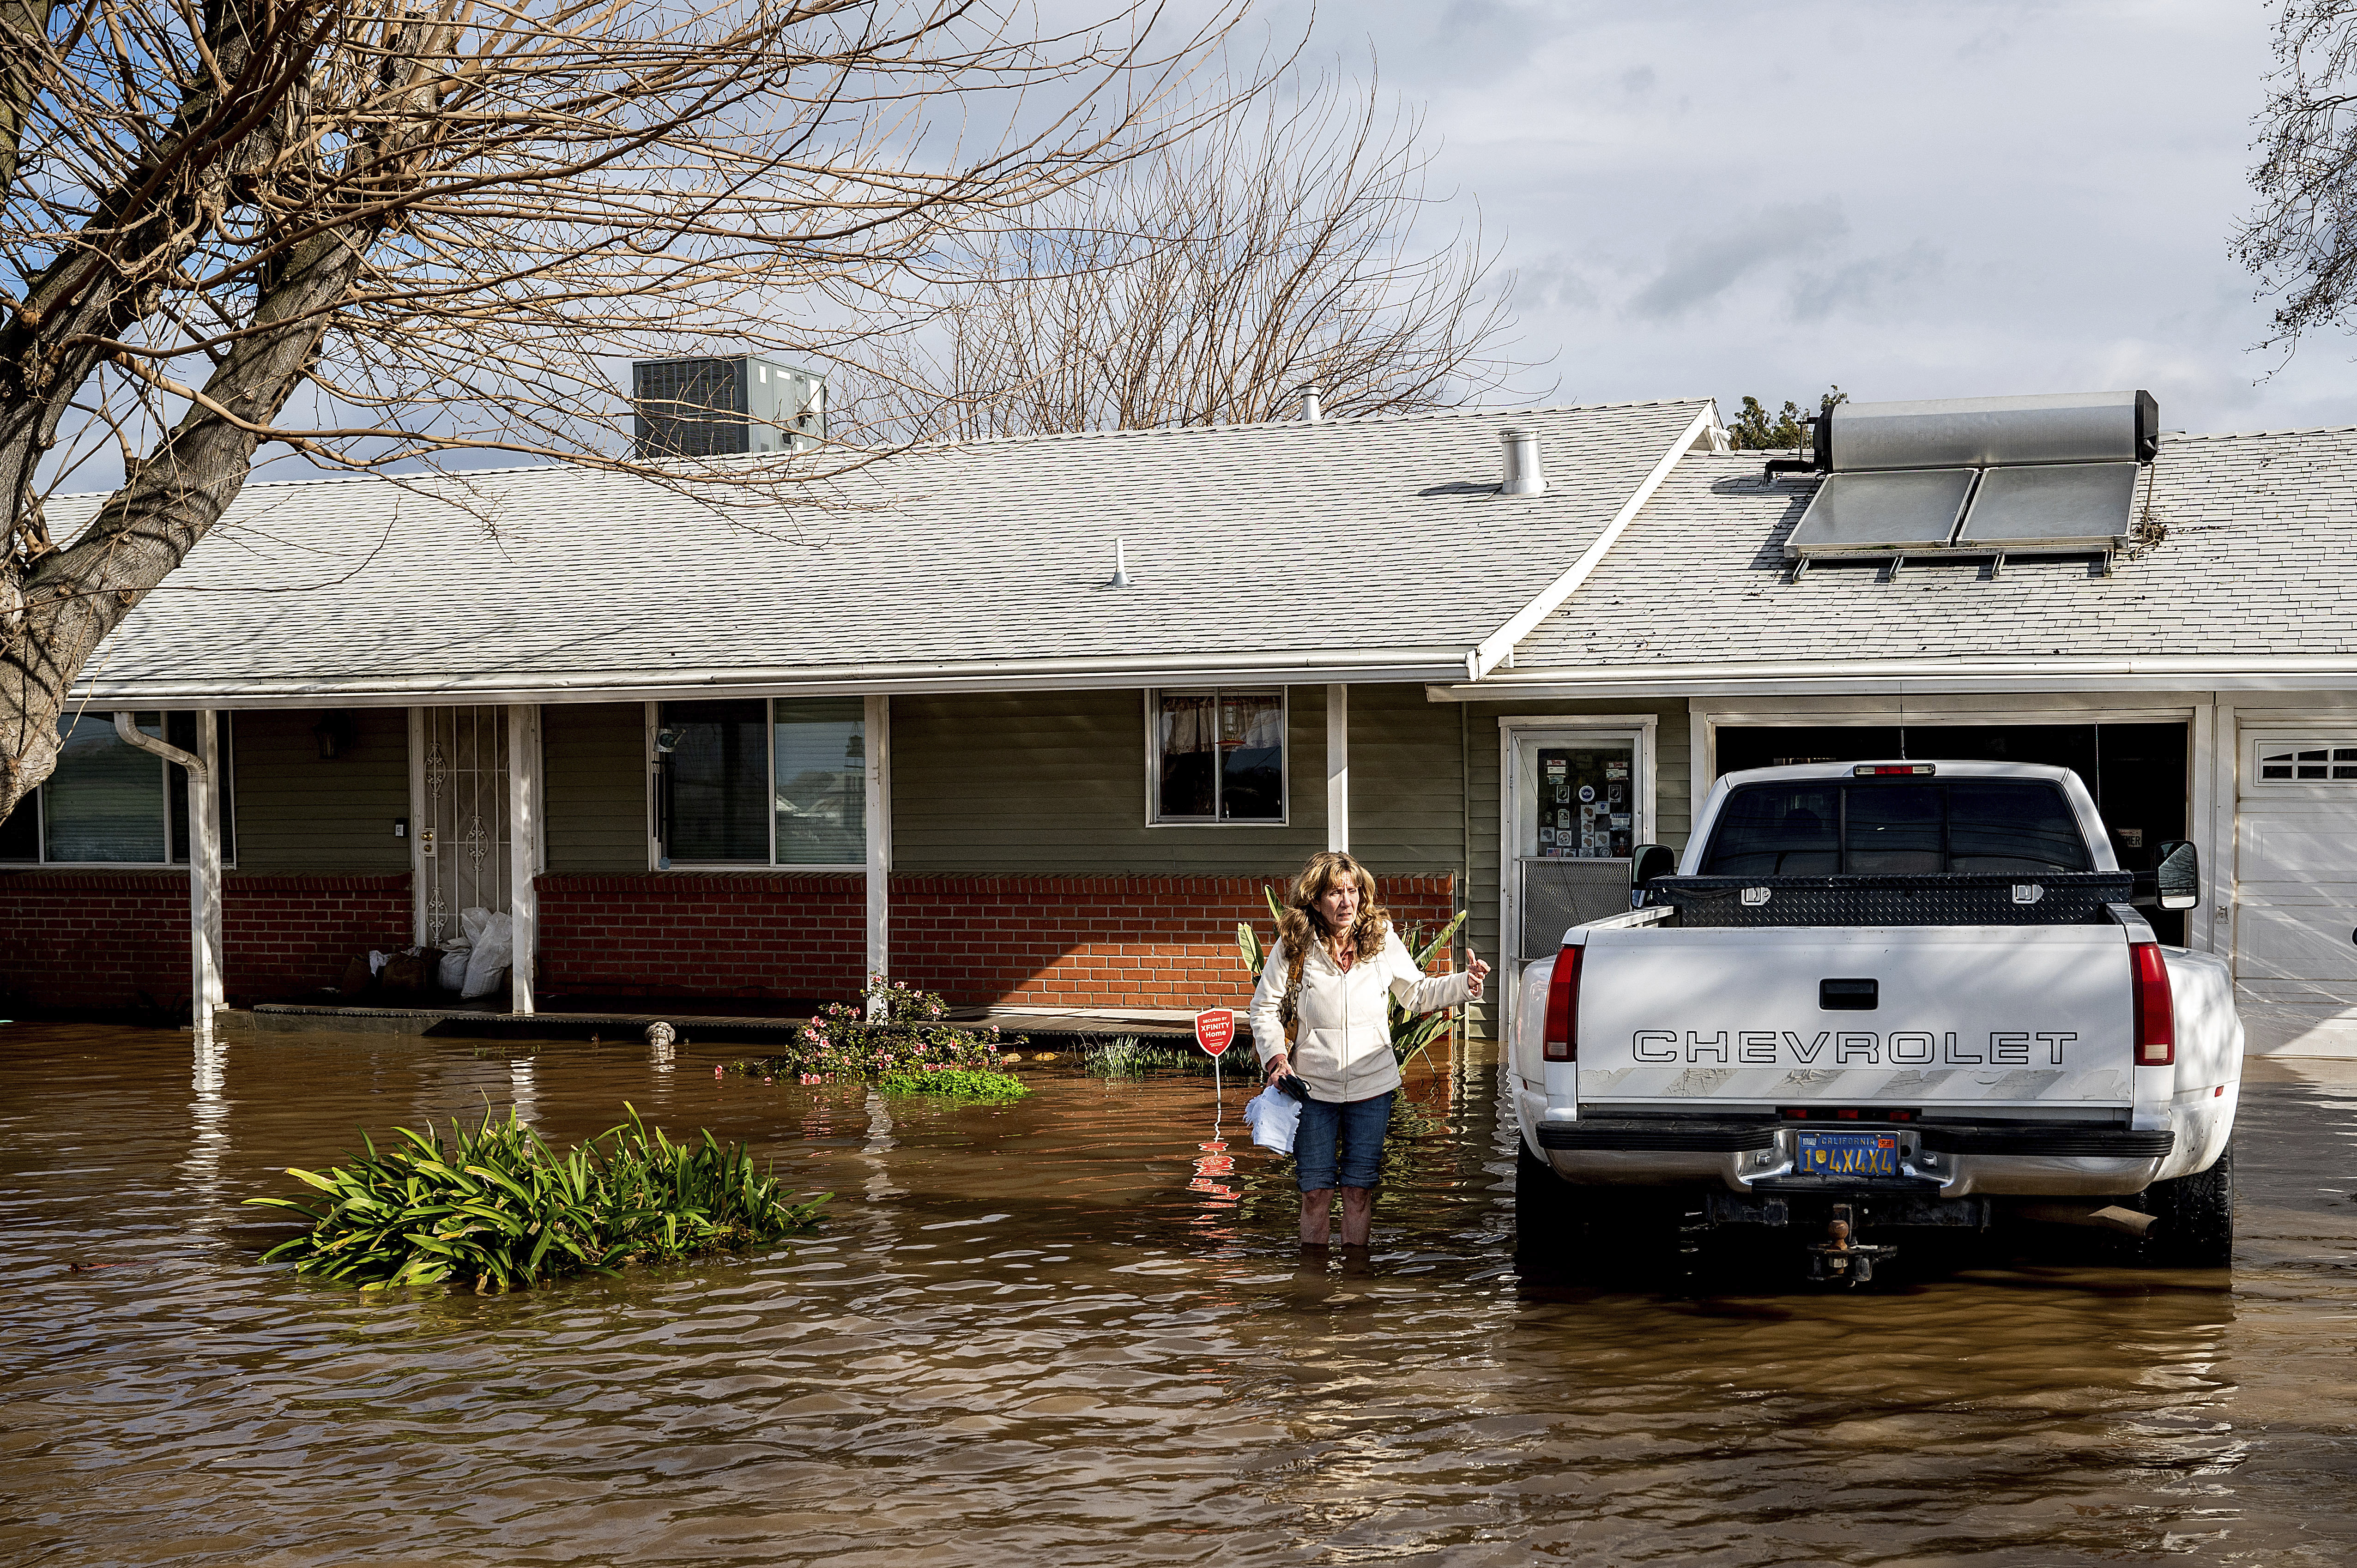 Kim Ochoa leaves her Merced, Calif., home, which is surrounded by floodwaters, as storms continue to batter the state on Tuesday, Jan. 10, 2023